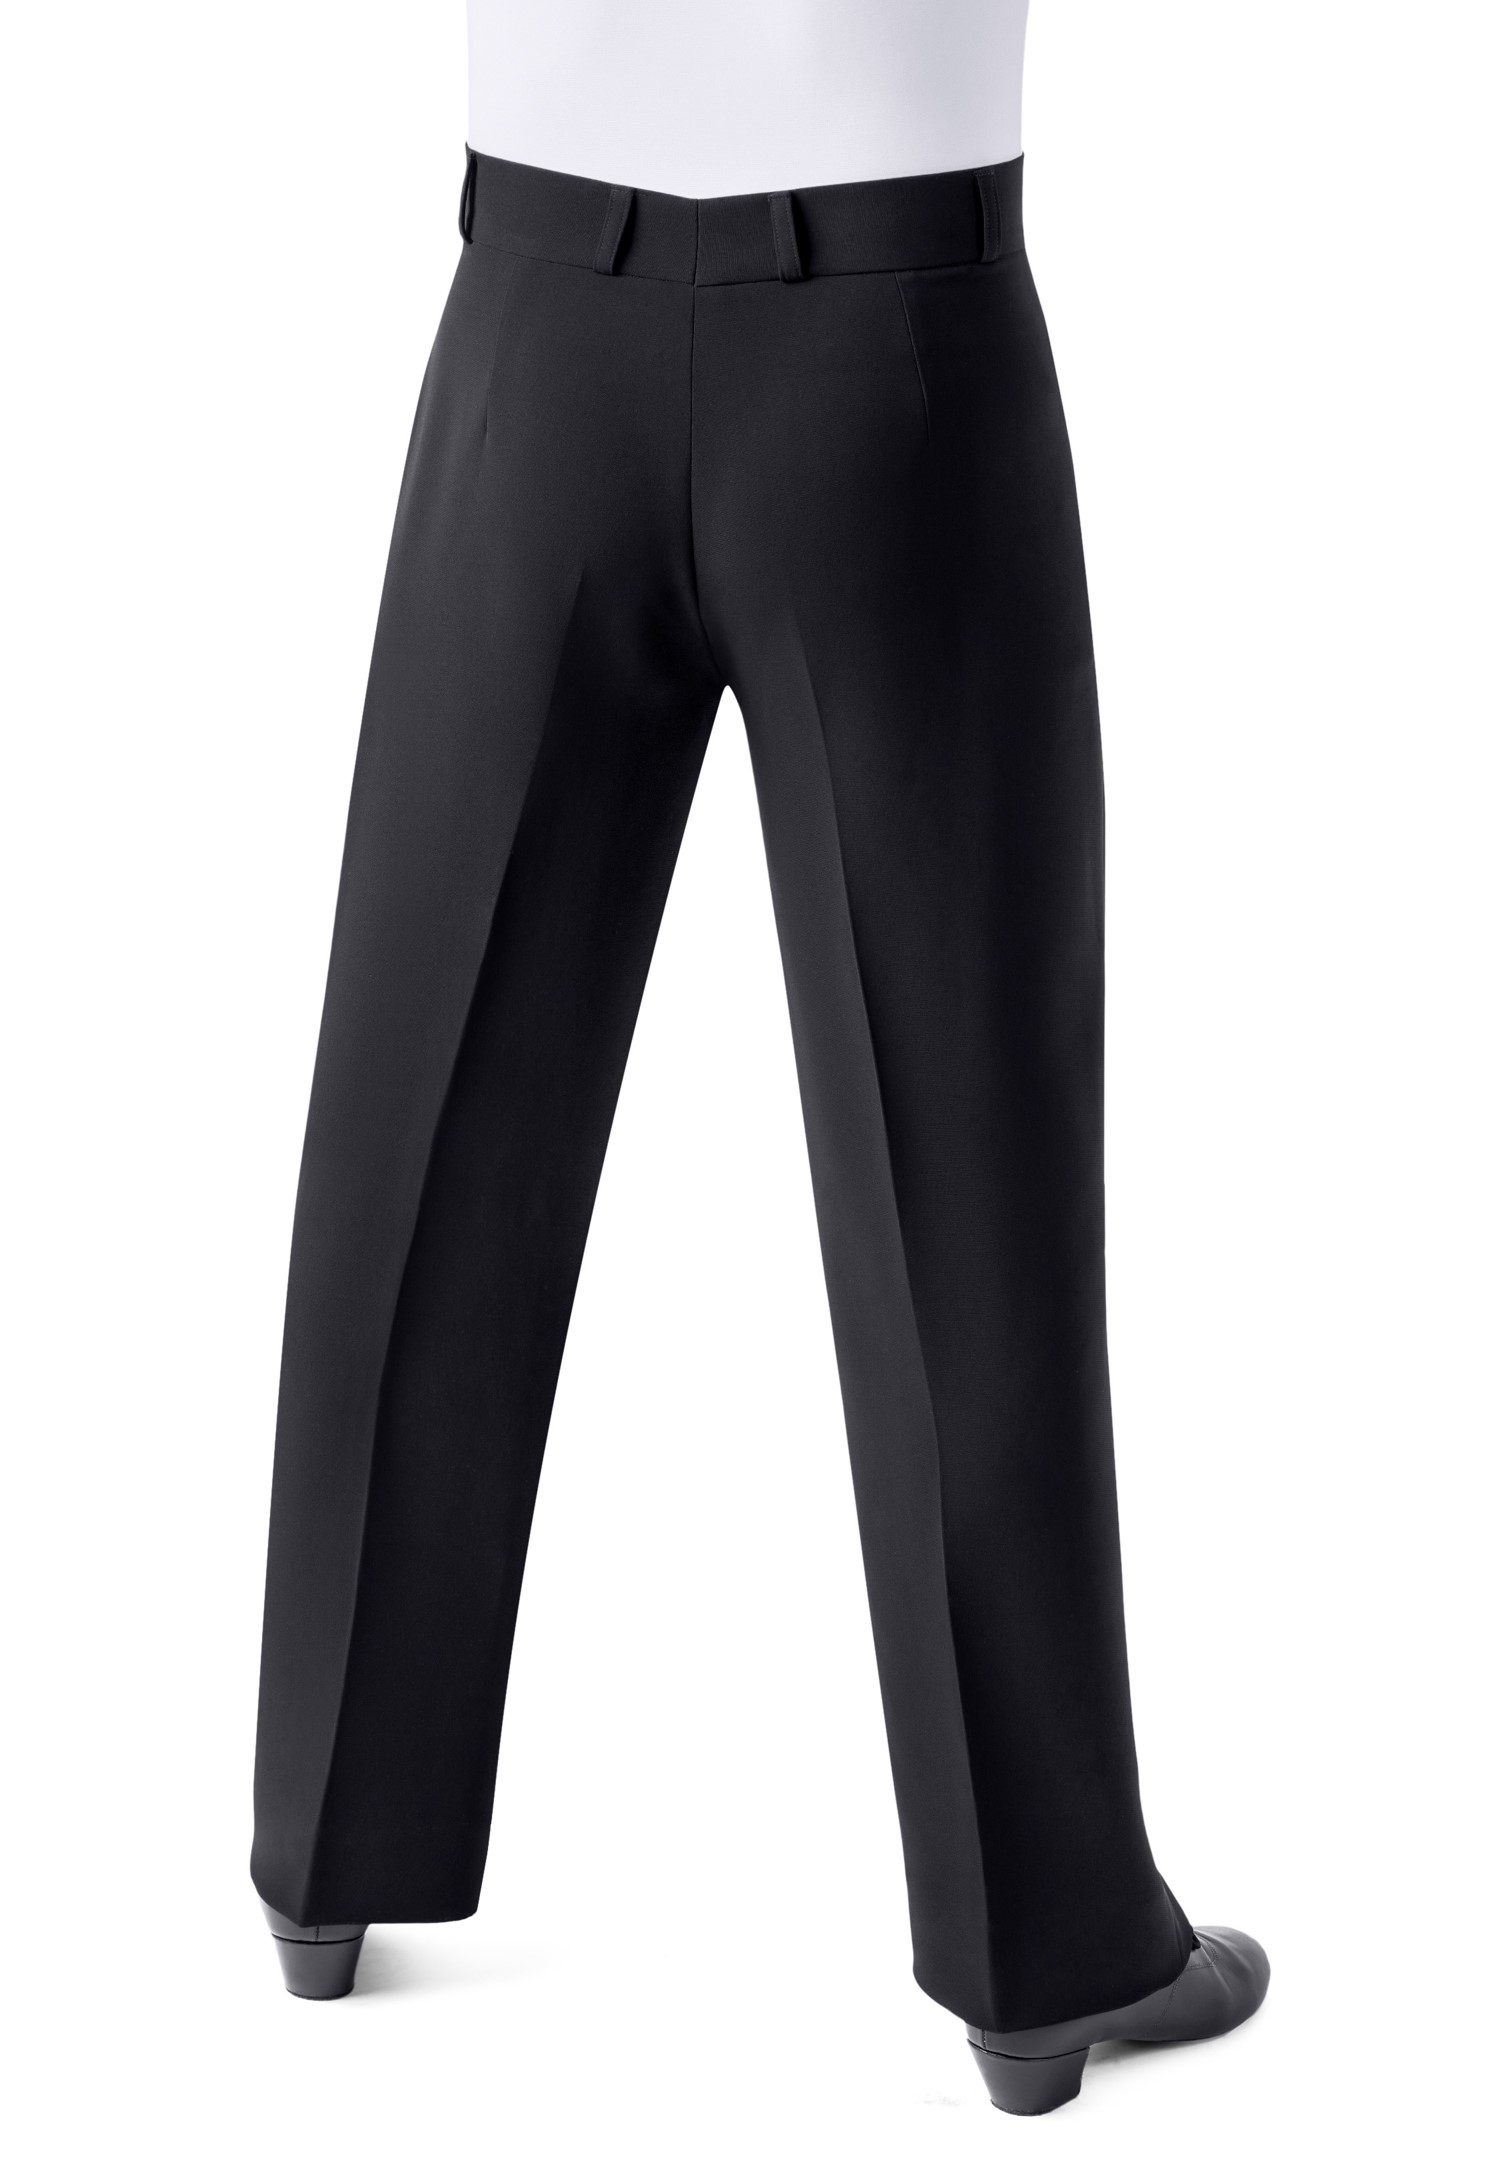 DSI Made-to-Order Dance Pants (Available in 15 Colors) (Minimum